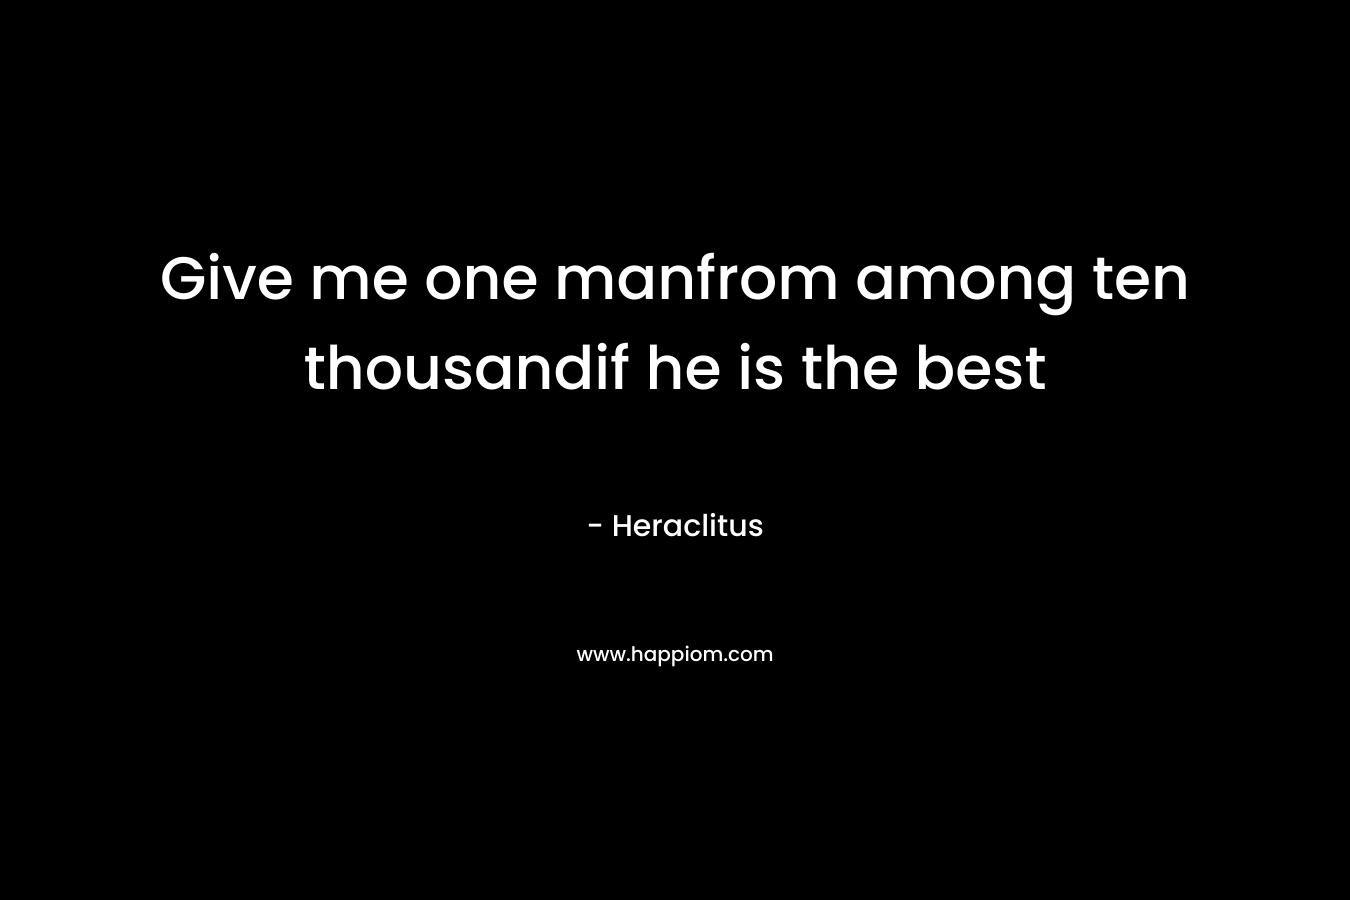 Give me one manfrom among ten thousandif he is the best – Heraclitus